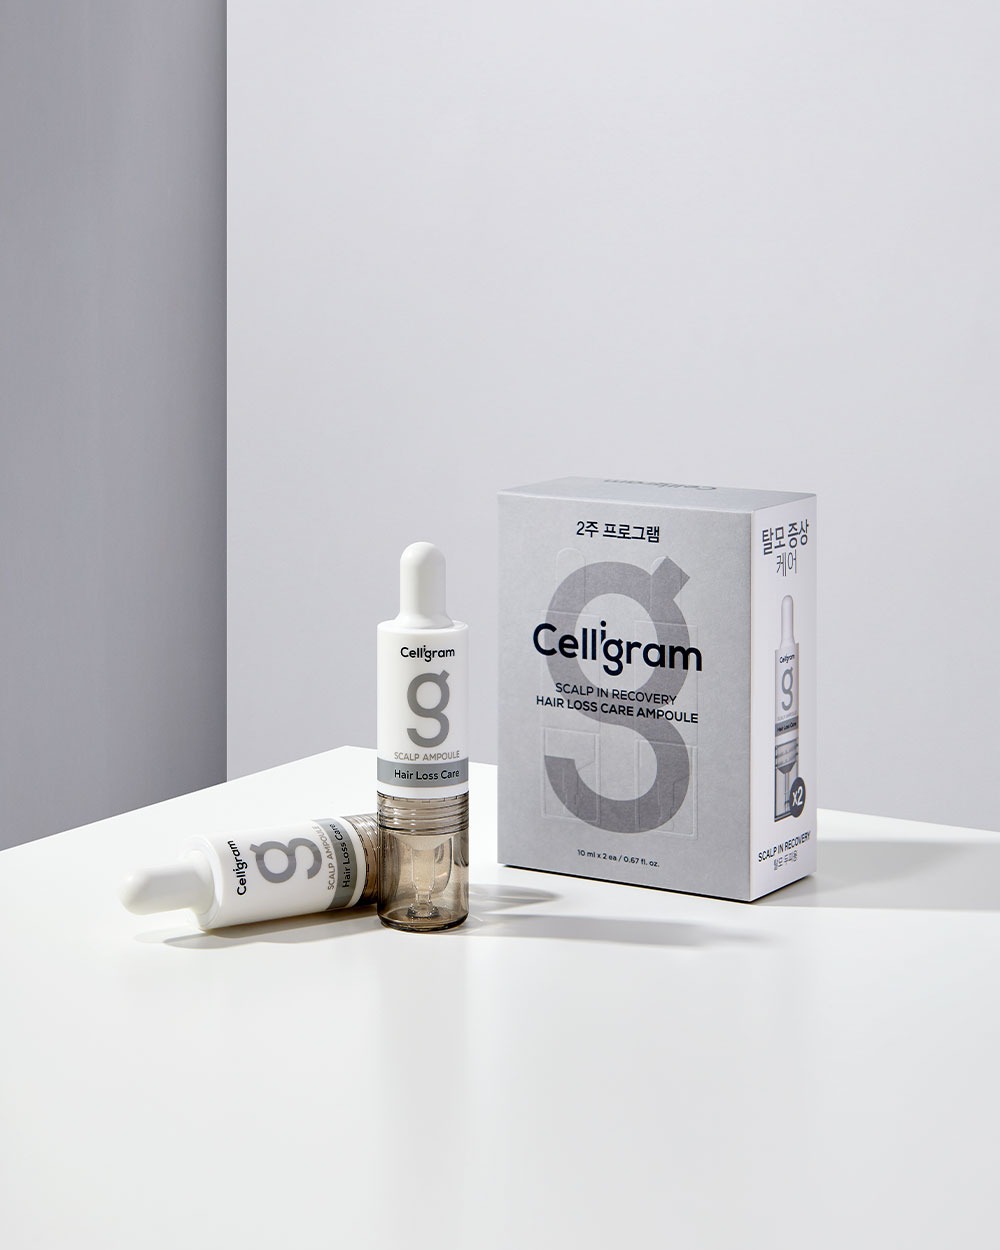 Celligram Scalp in Recovery Hair Loss Ampoule